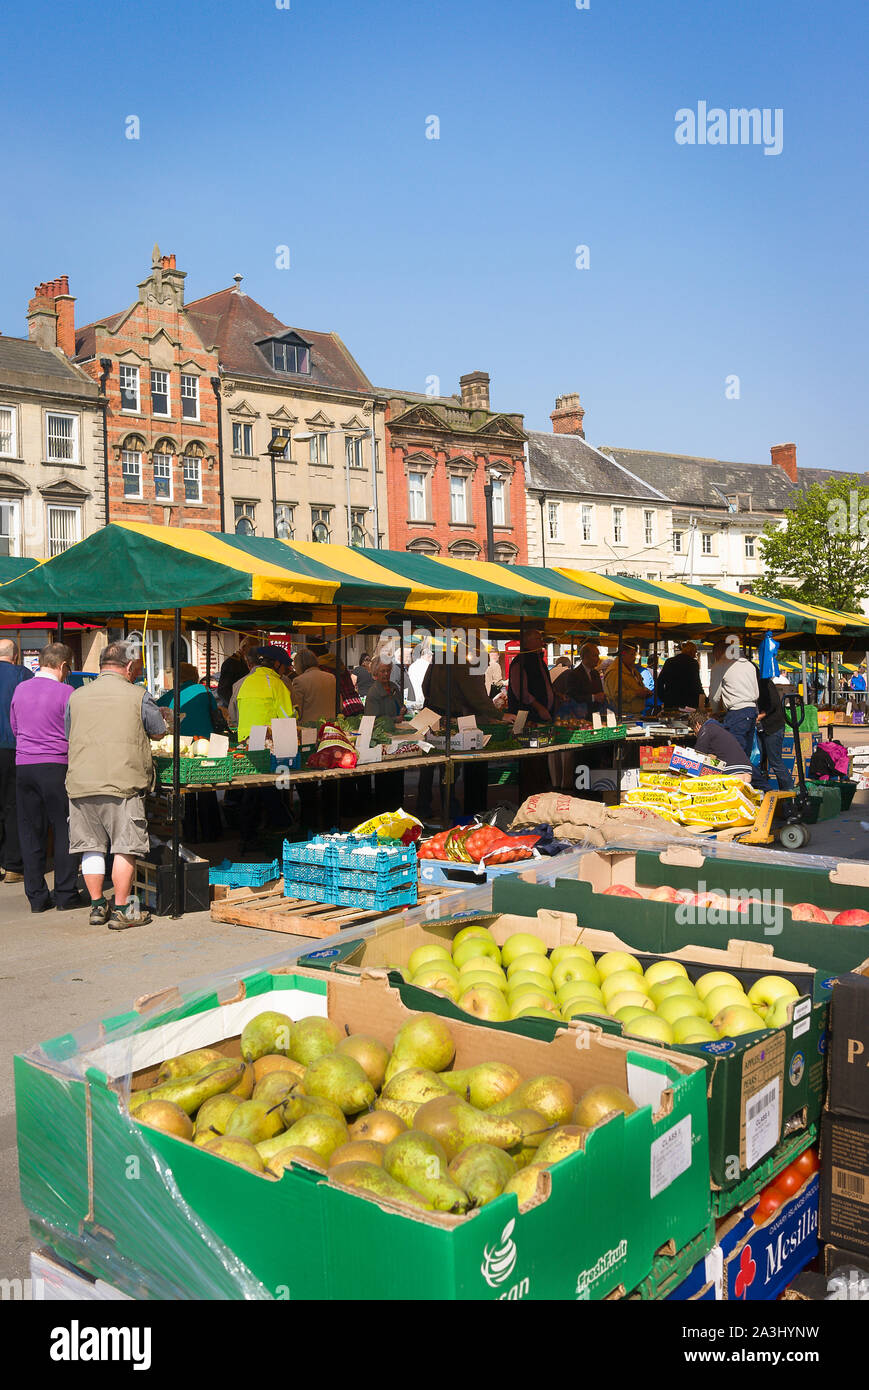 Fresh fruit and other commodities displayed for sale in Worksop market place in England UK Stock Photo